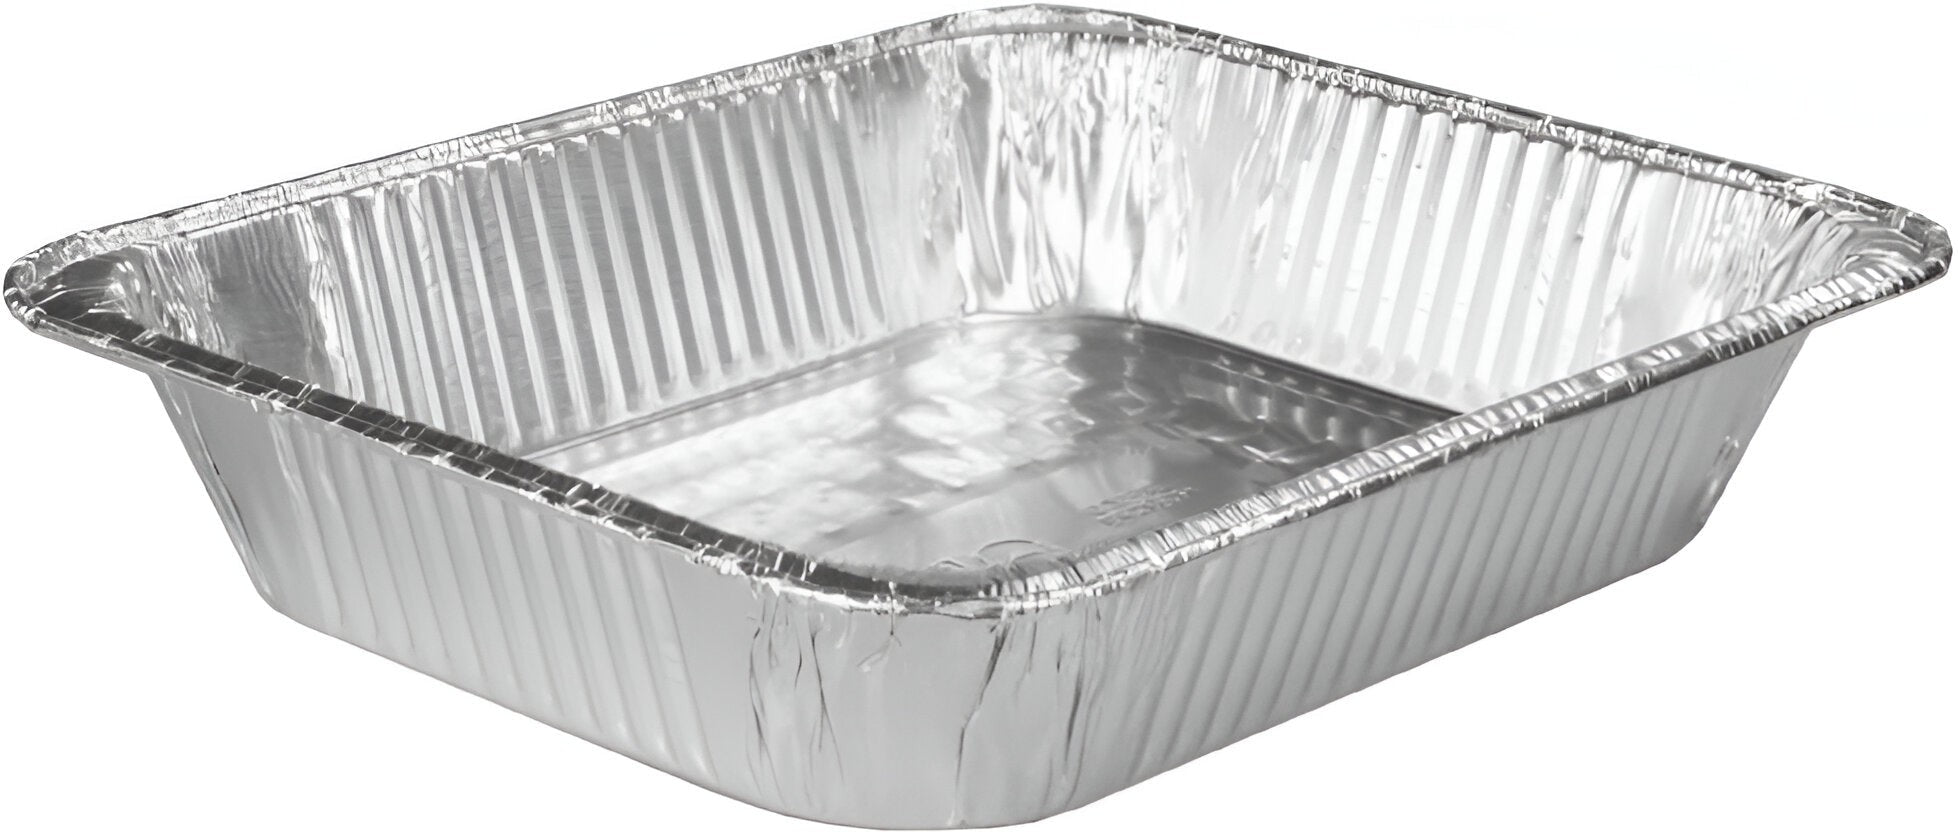 HFA - Half Size Deep Foil Steam Table Containers, 100/Cs - 321-00-100